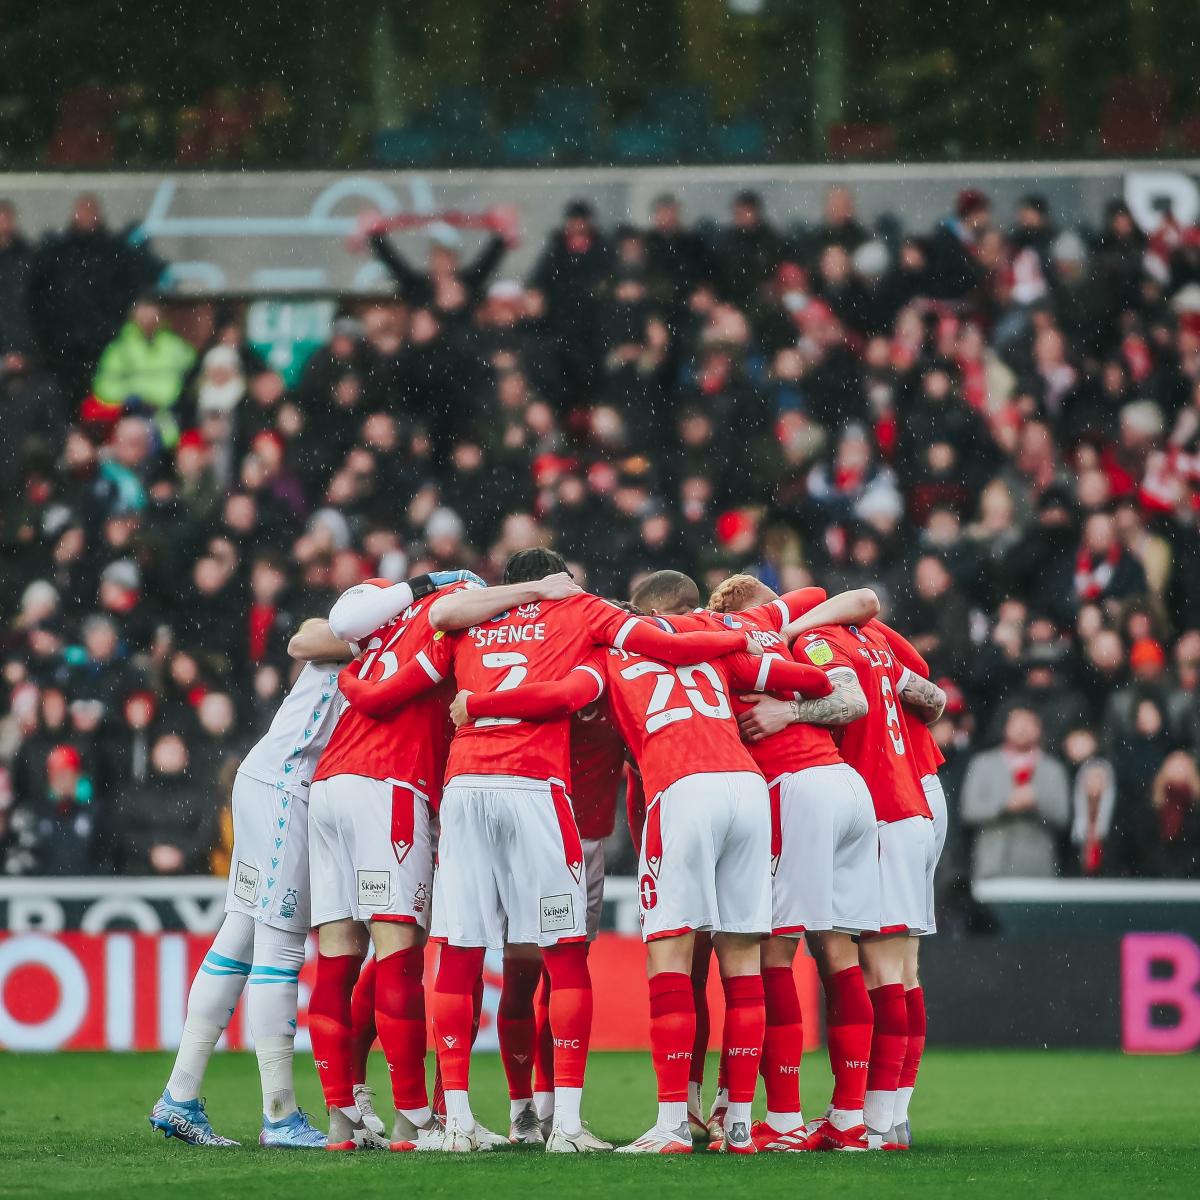 Nottingham Forest in match/Image:NFFC